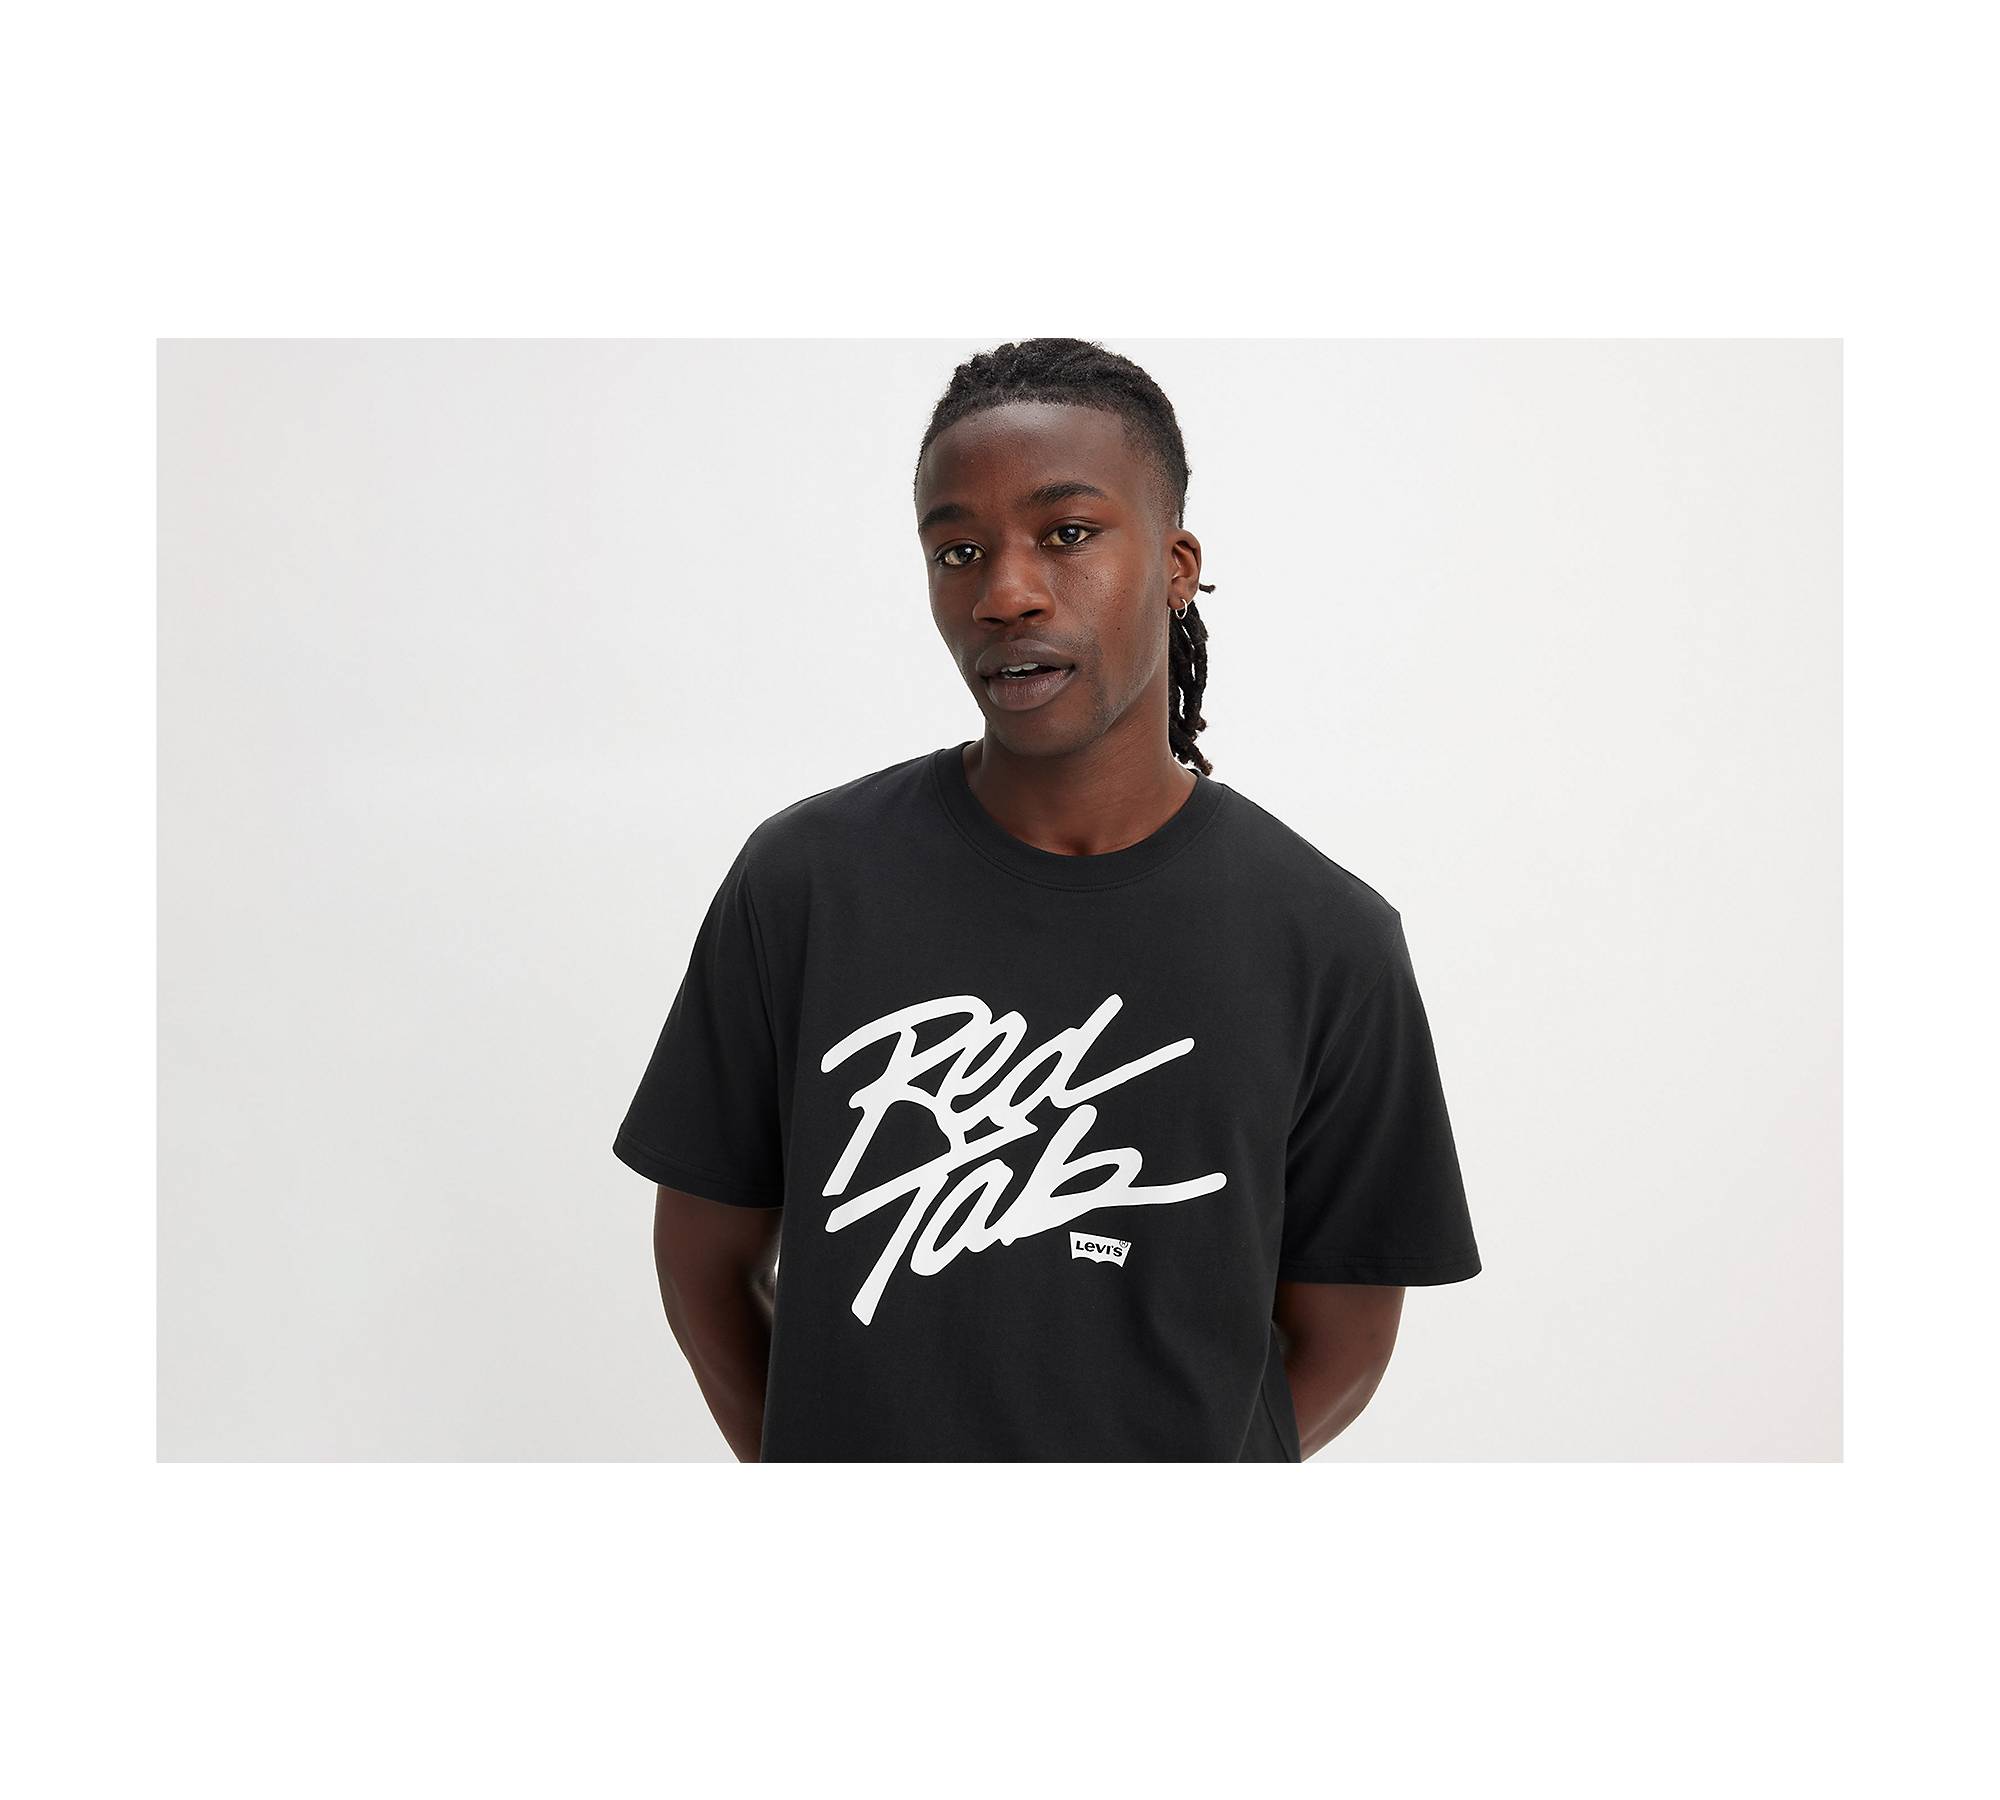 Men's Relaxed NYC by the Slice Graphic Tee, Men's Tops